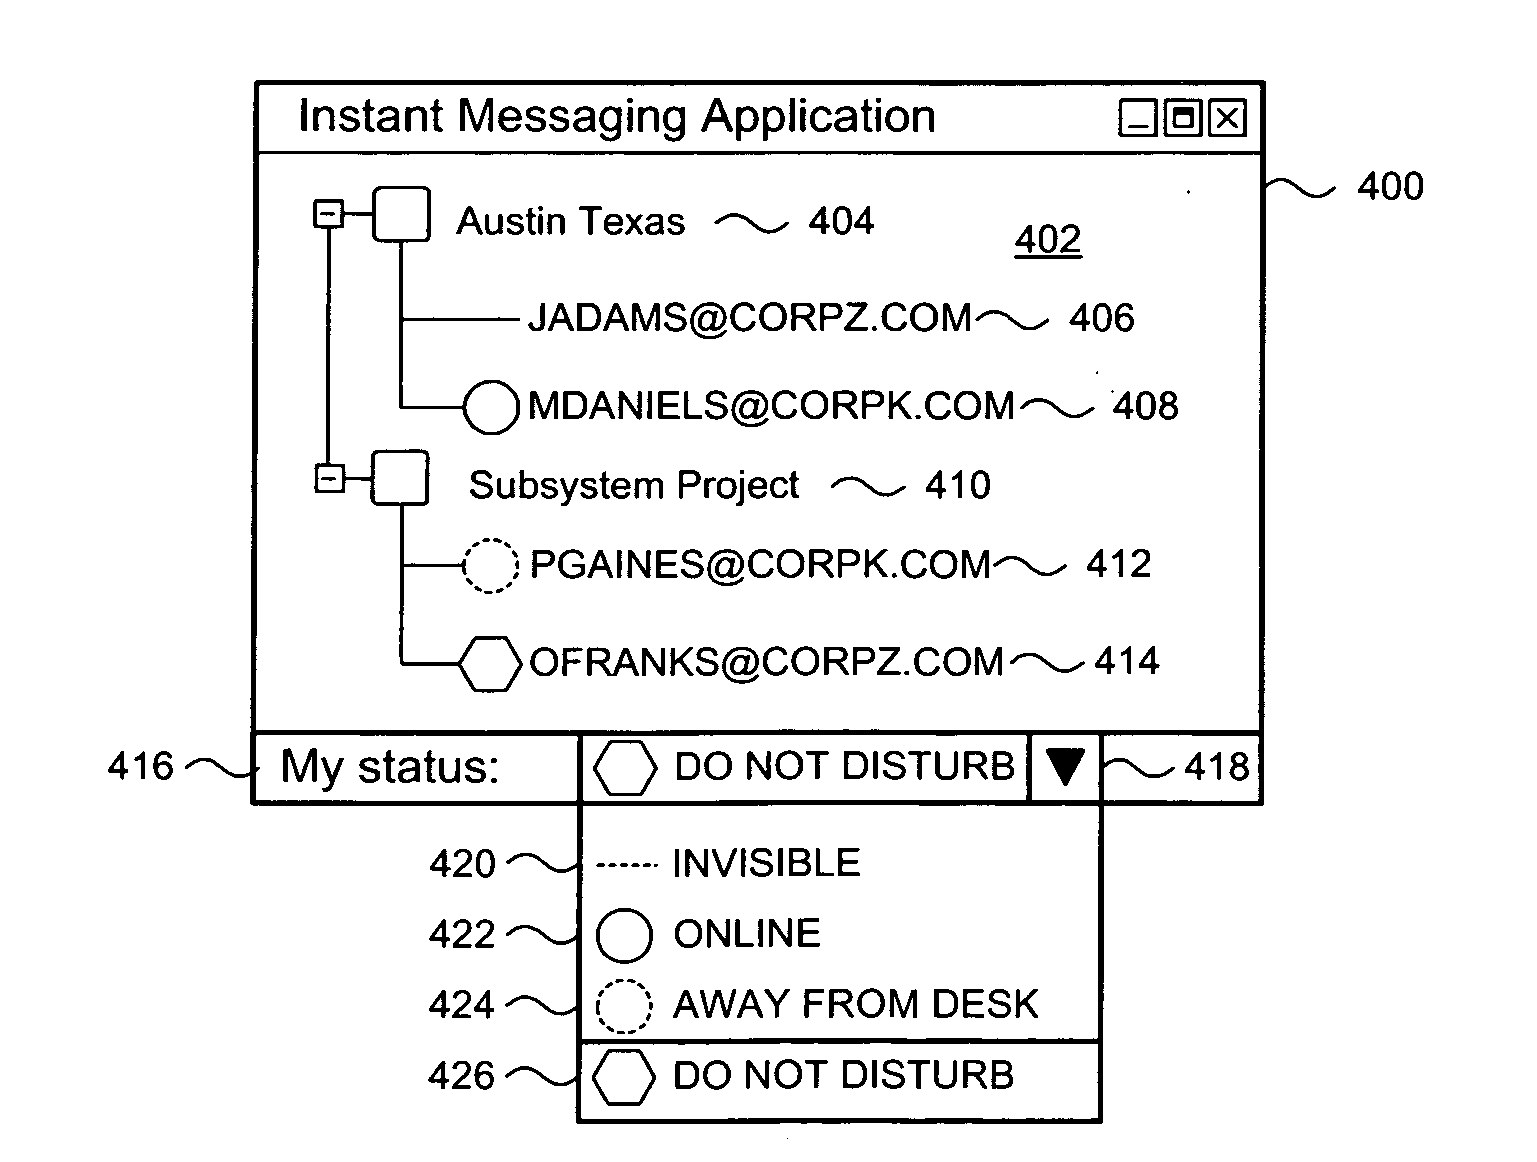 Method and system for automatically stetting chat status based on user activity in local environment